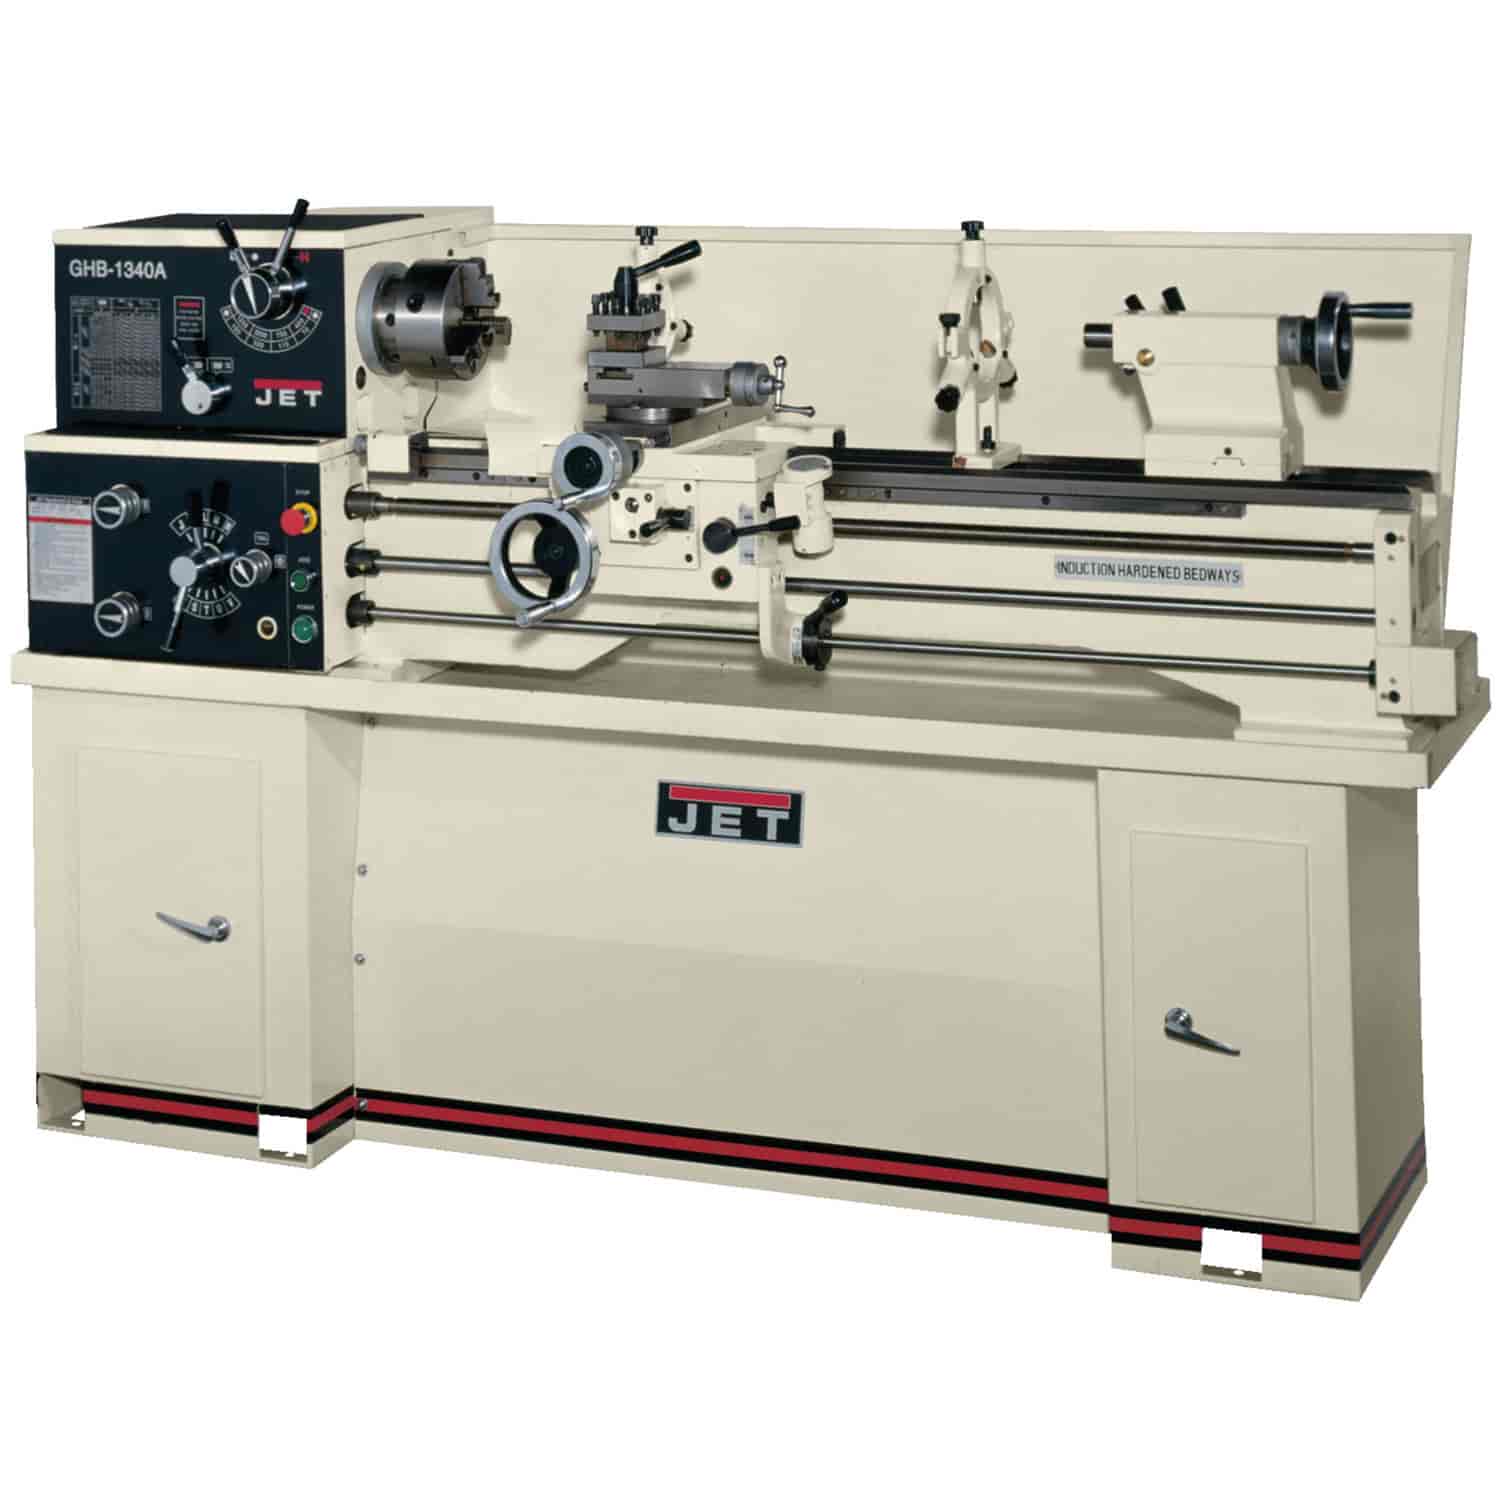 GHB-1340A Lathe With Newall DP500 DRO With Taper Attachment